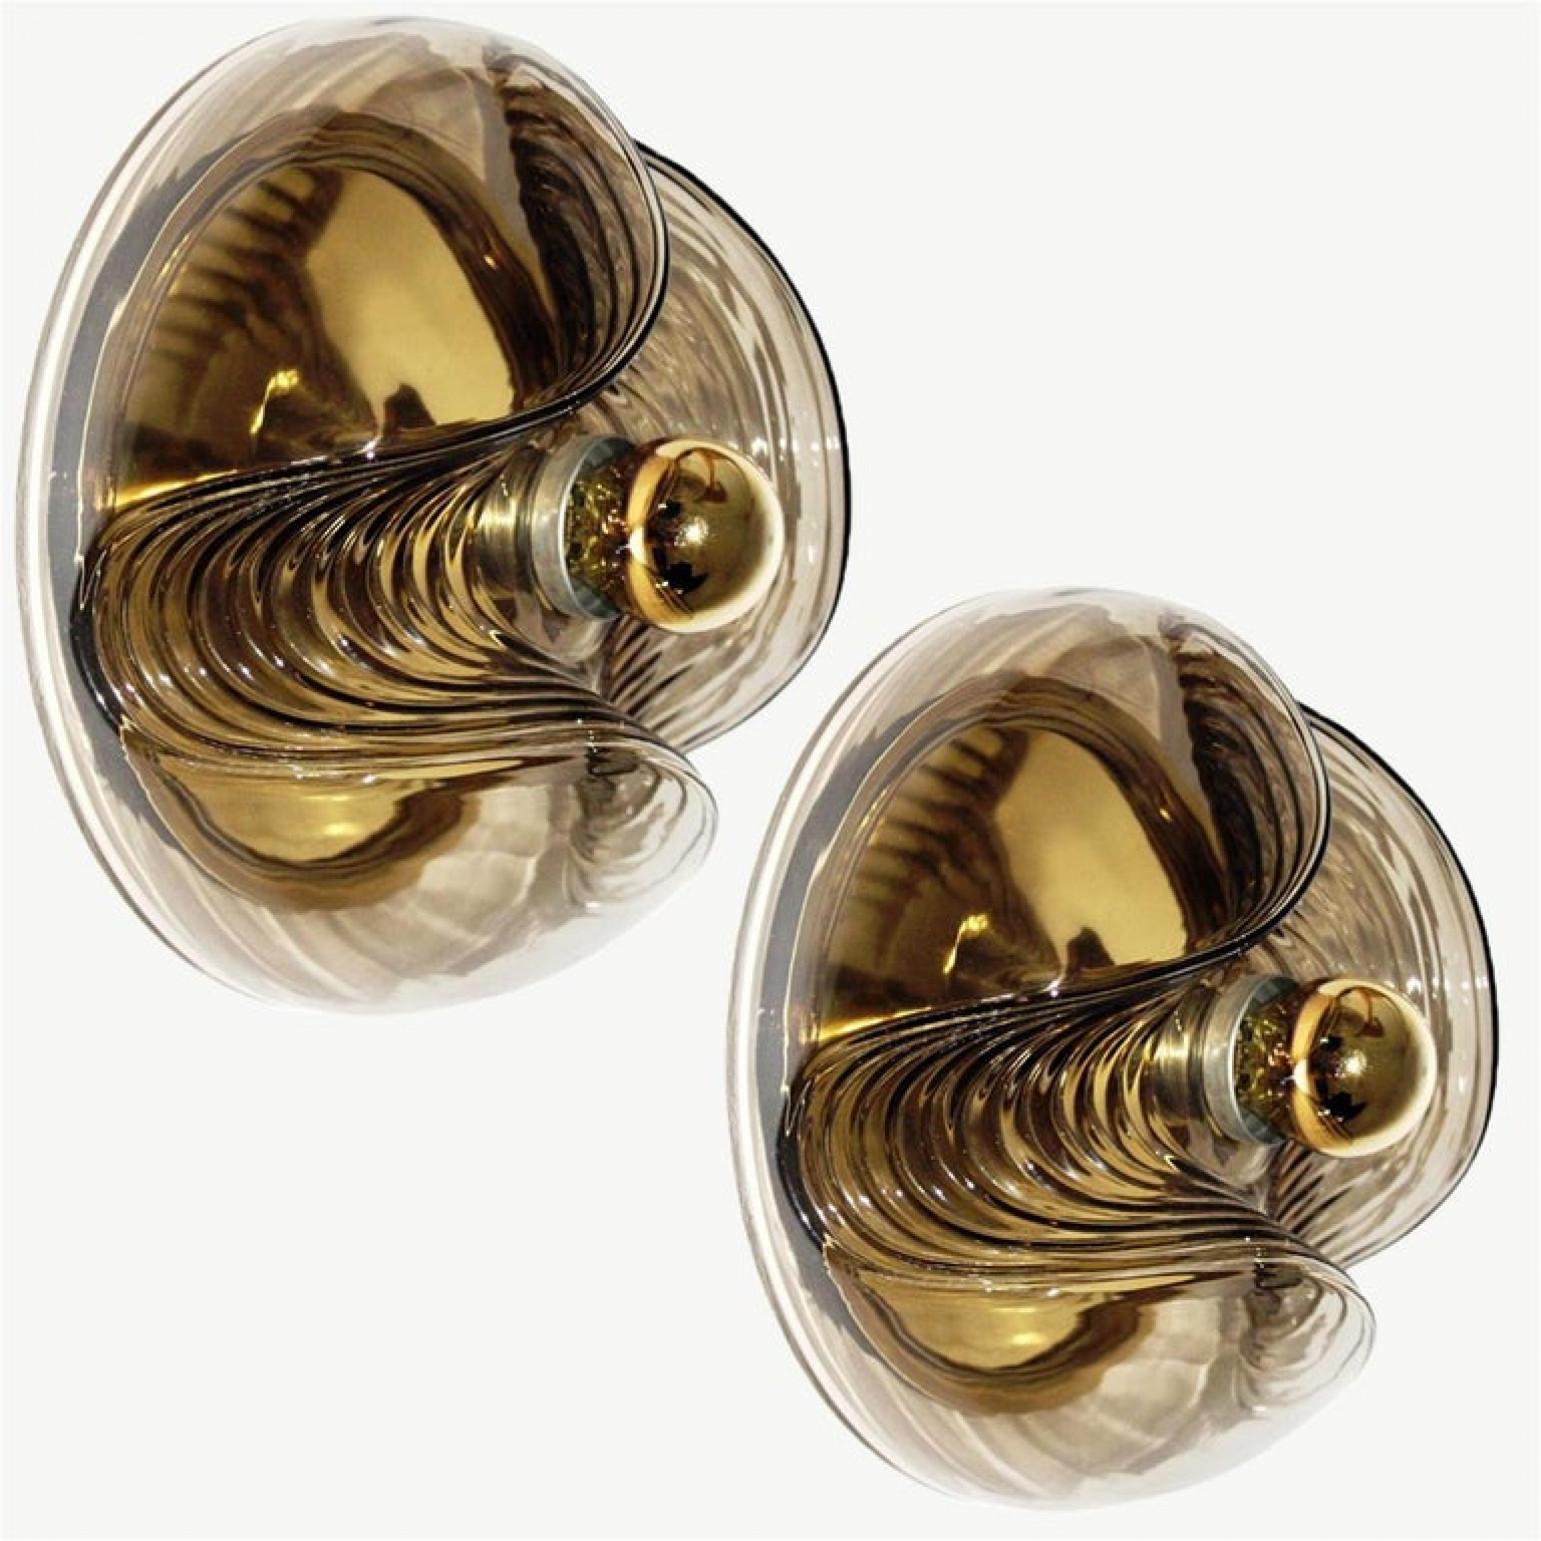 Pair of Koch & Lowy Smoked Glass Wall Sconces/Lights by Peill Putzler, 1970 For Sale 1